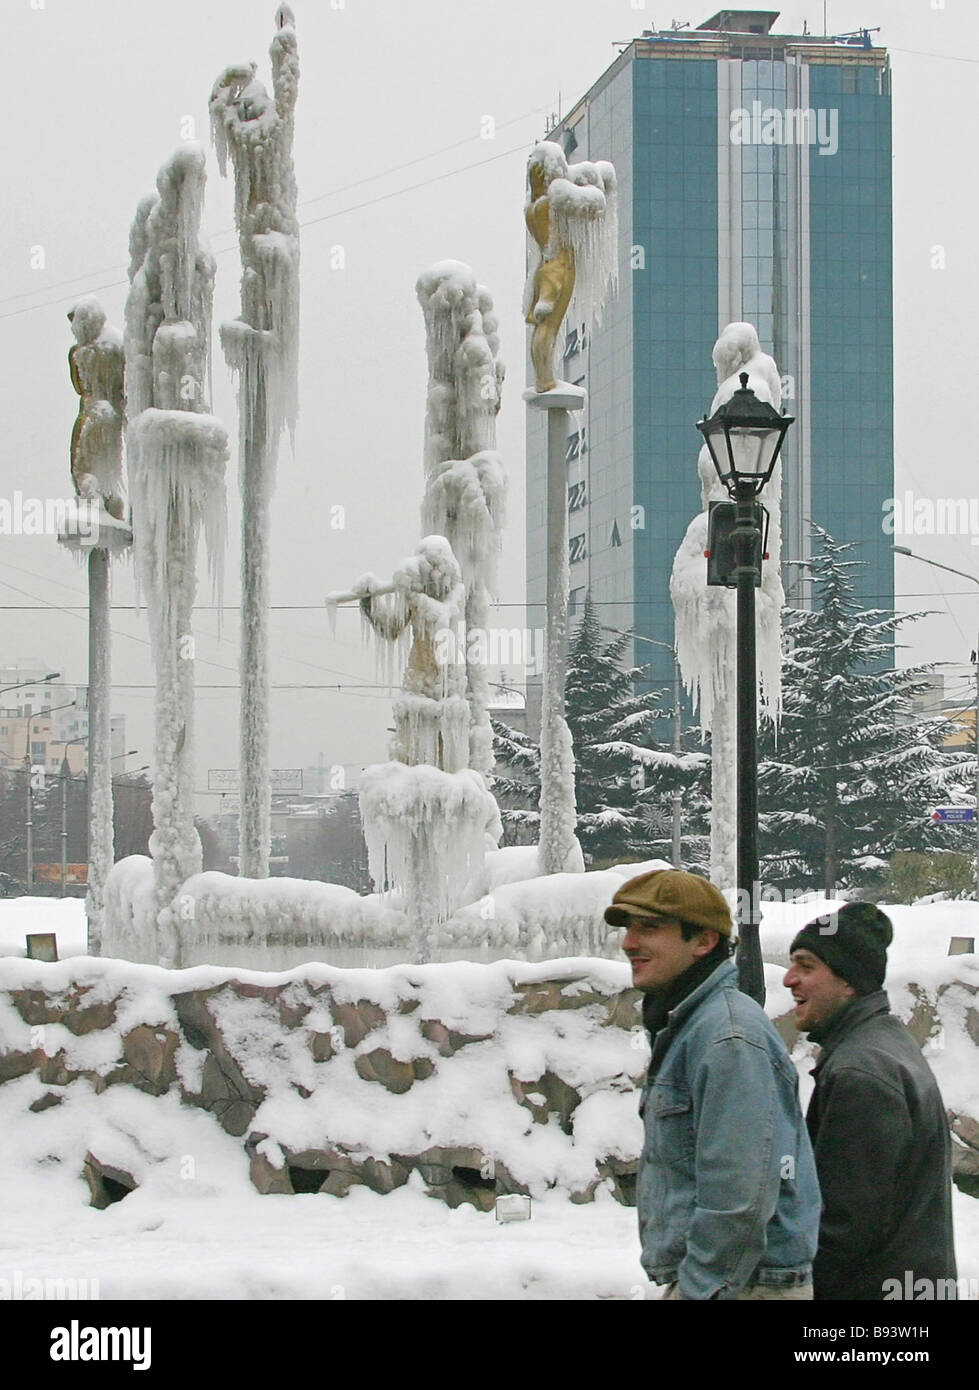 Tbilisi has unusually cold weather Temperature has fallen to minus 15